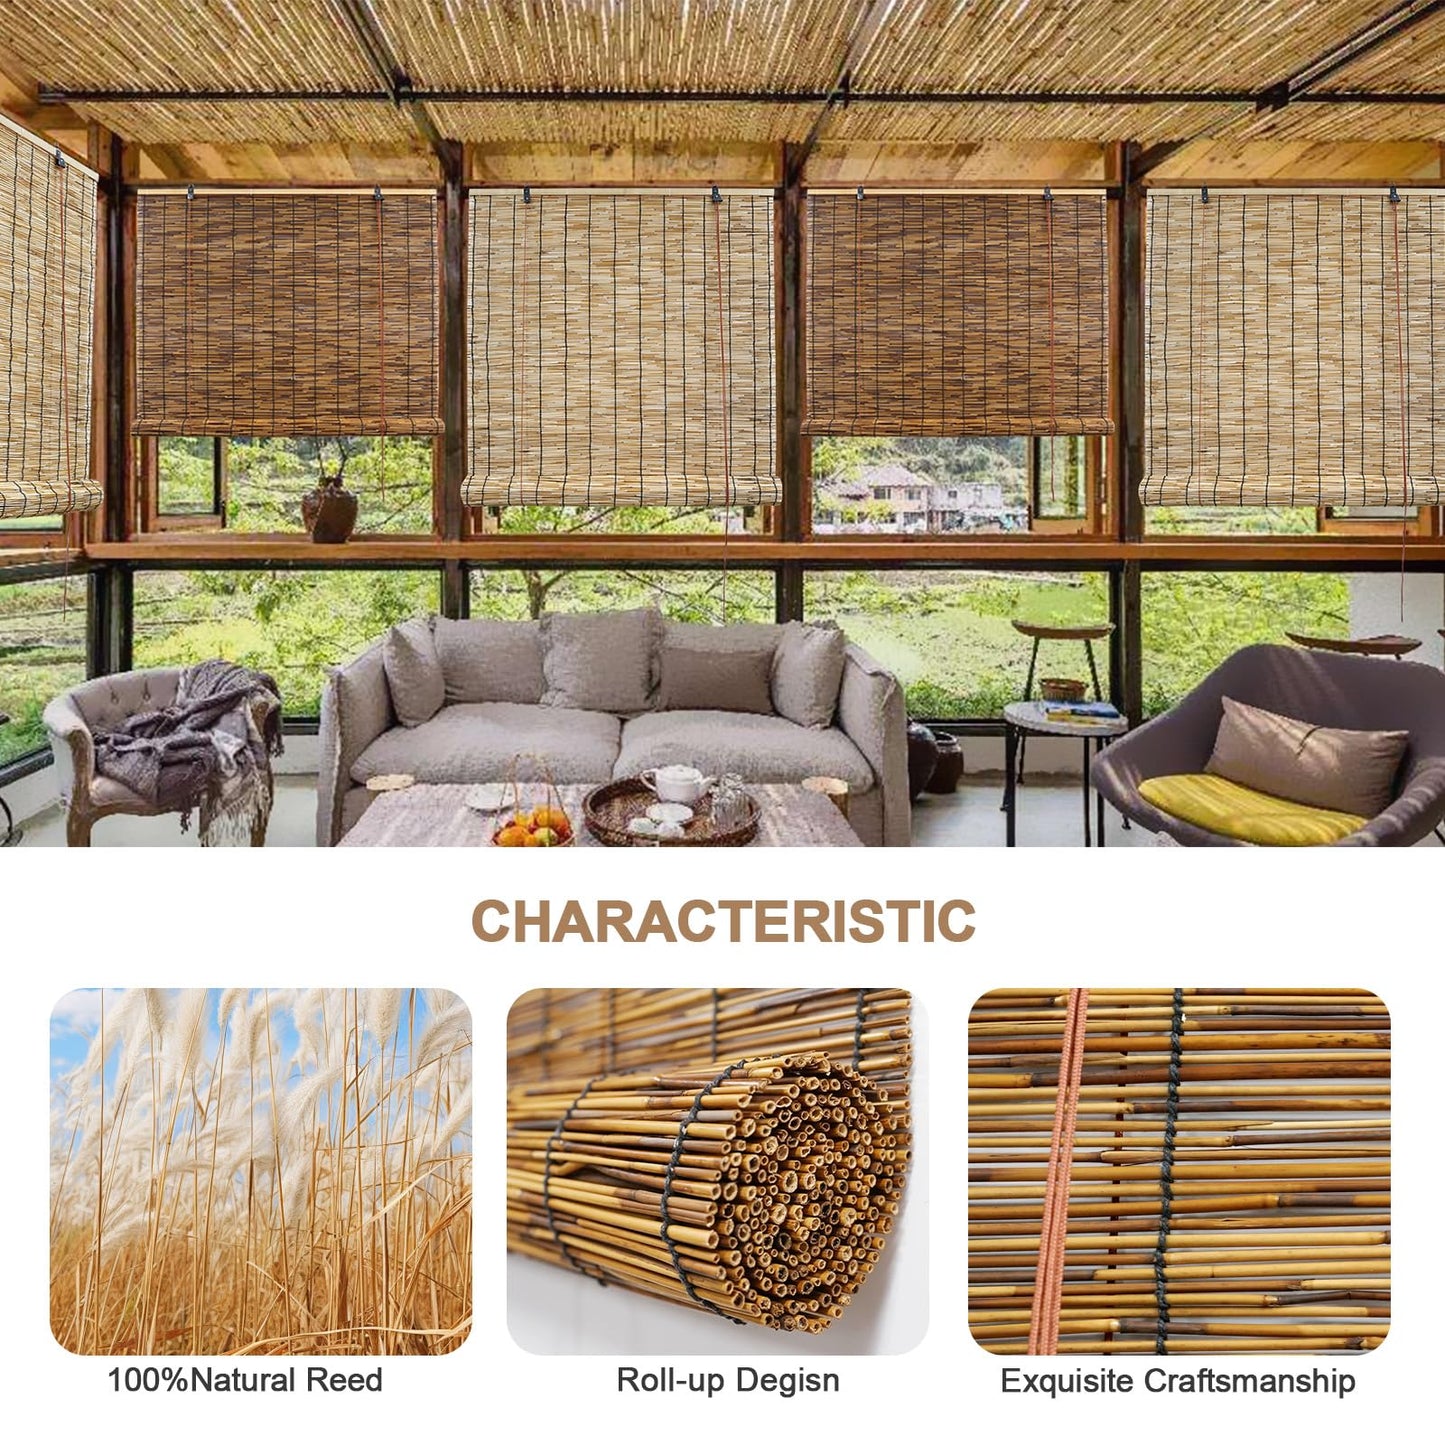 ORNDSDM Bamboo Blinds, Bamboo Shades, Bamboo Blinds for Outdoor Patio, Bamboo Shades for Patio, Custom Size, Outdoor Bamboo Shades for Restaurants, Resorts, Terraces, Balconies, Outdoor Leisure Places